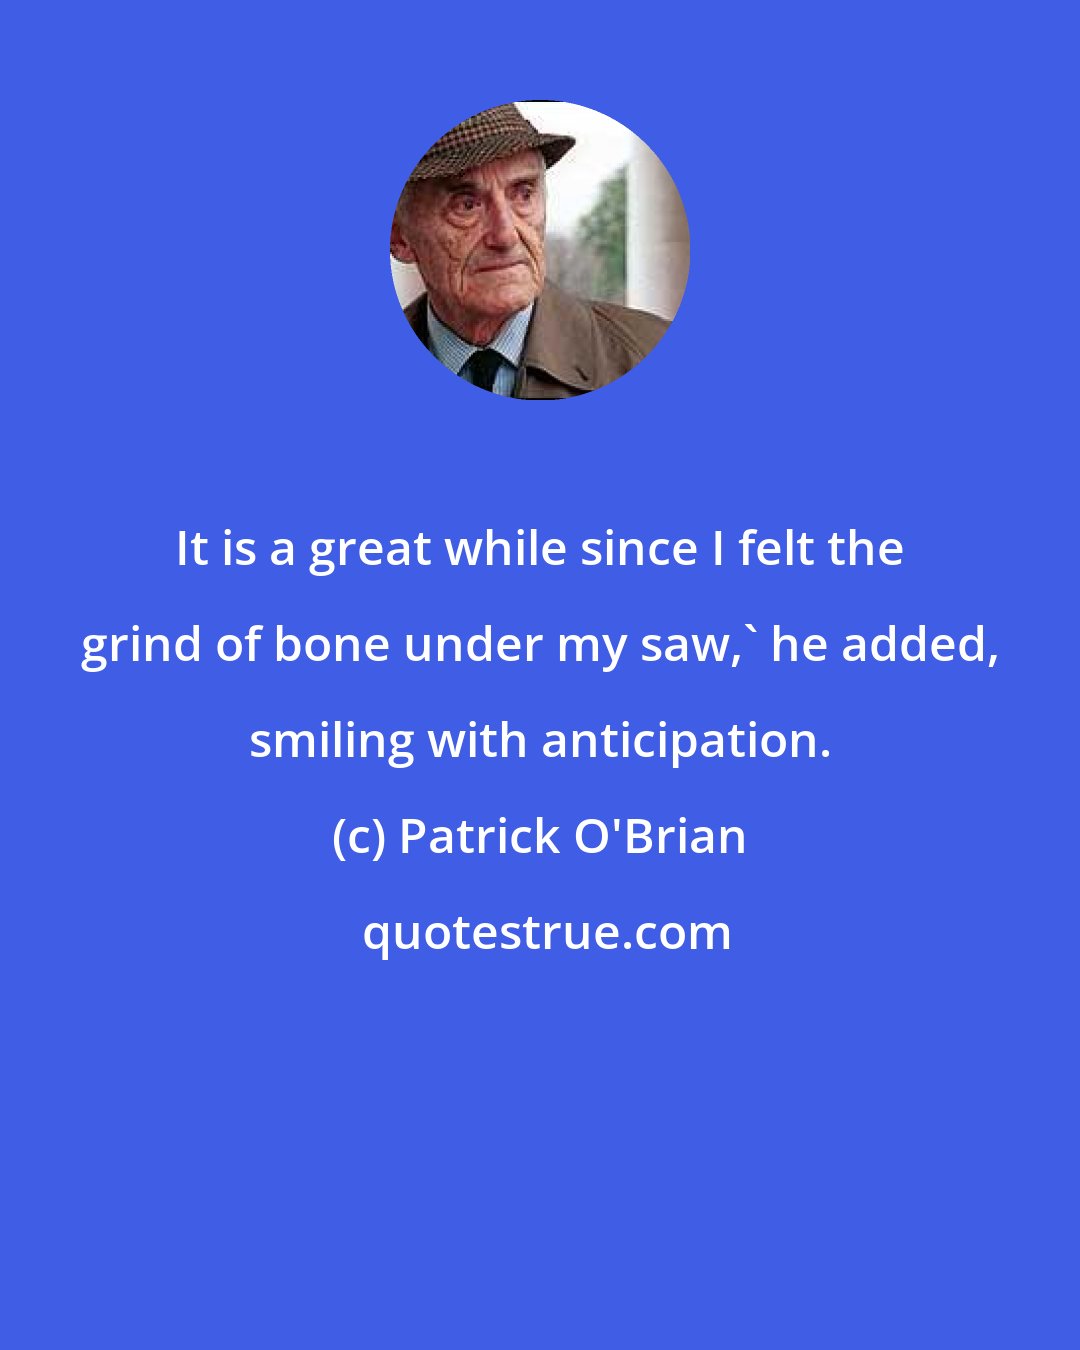 Patrick O'Brian: It is a great while since I felt the grind of bone under my saw,' he added, smiling with anticipation.